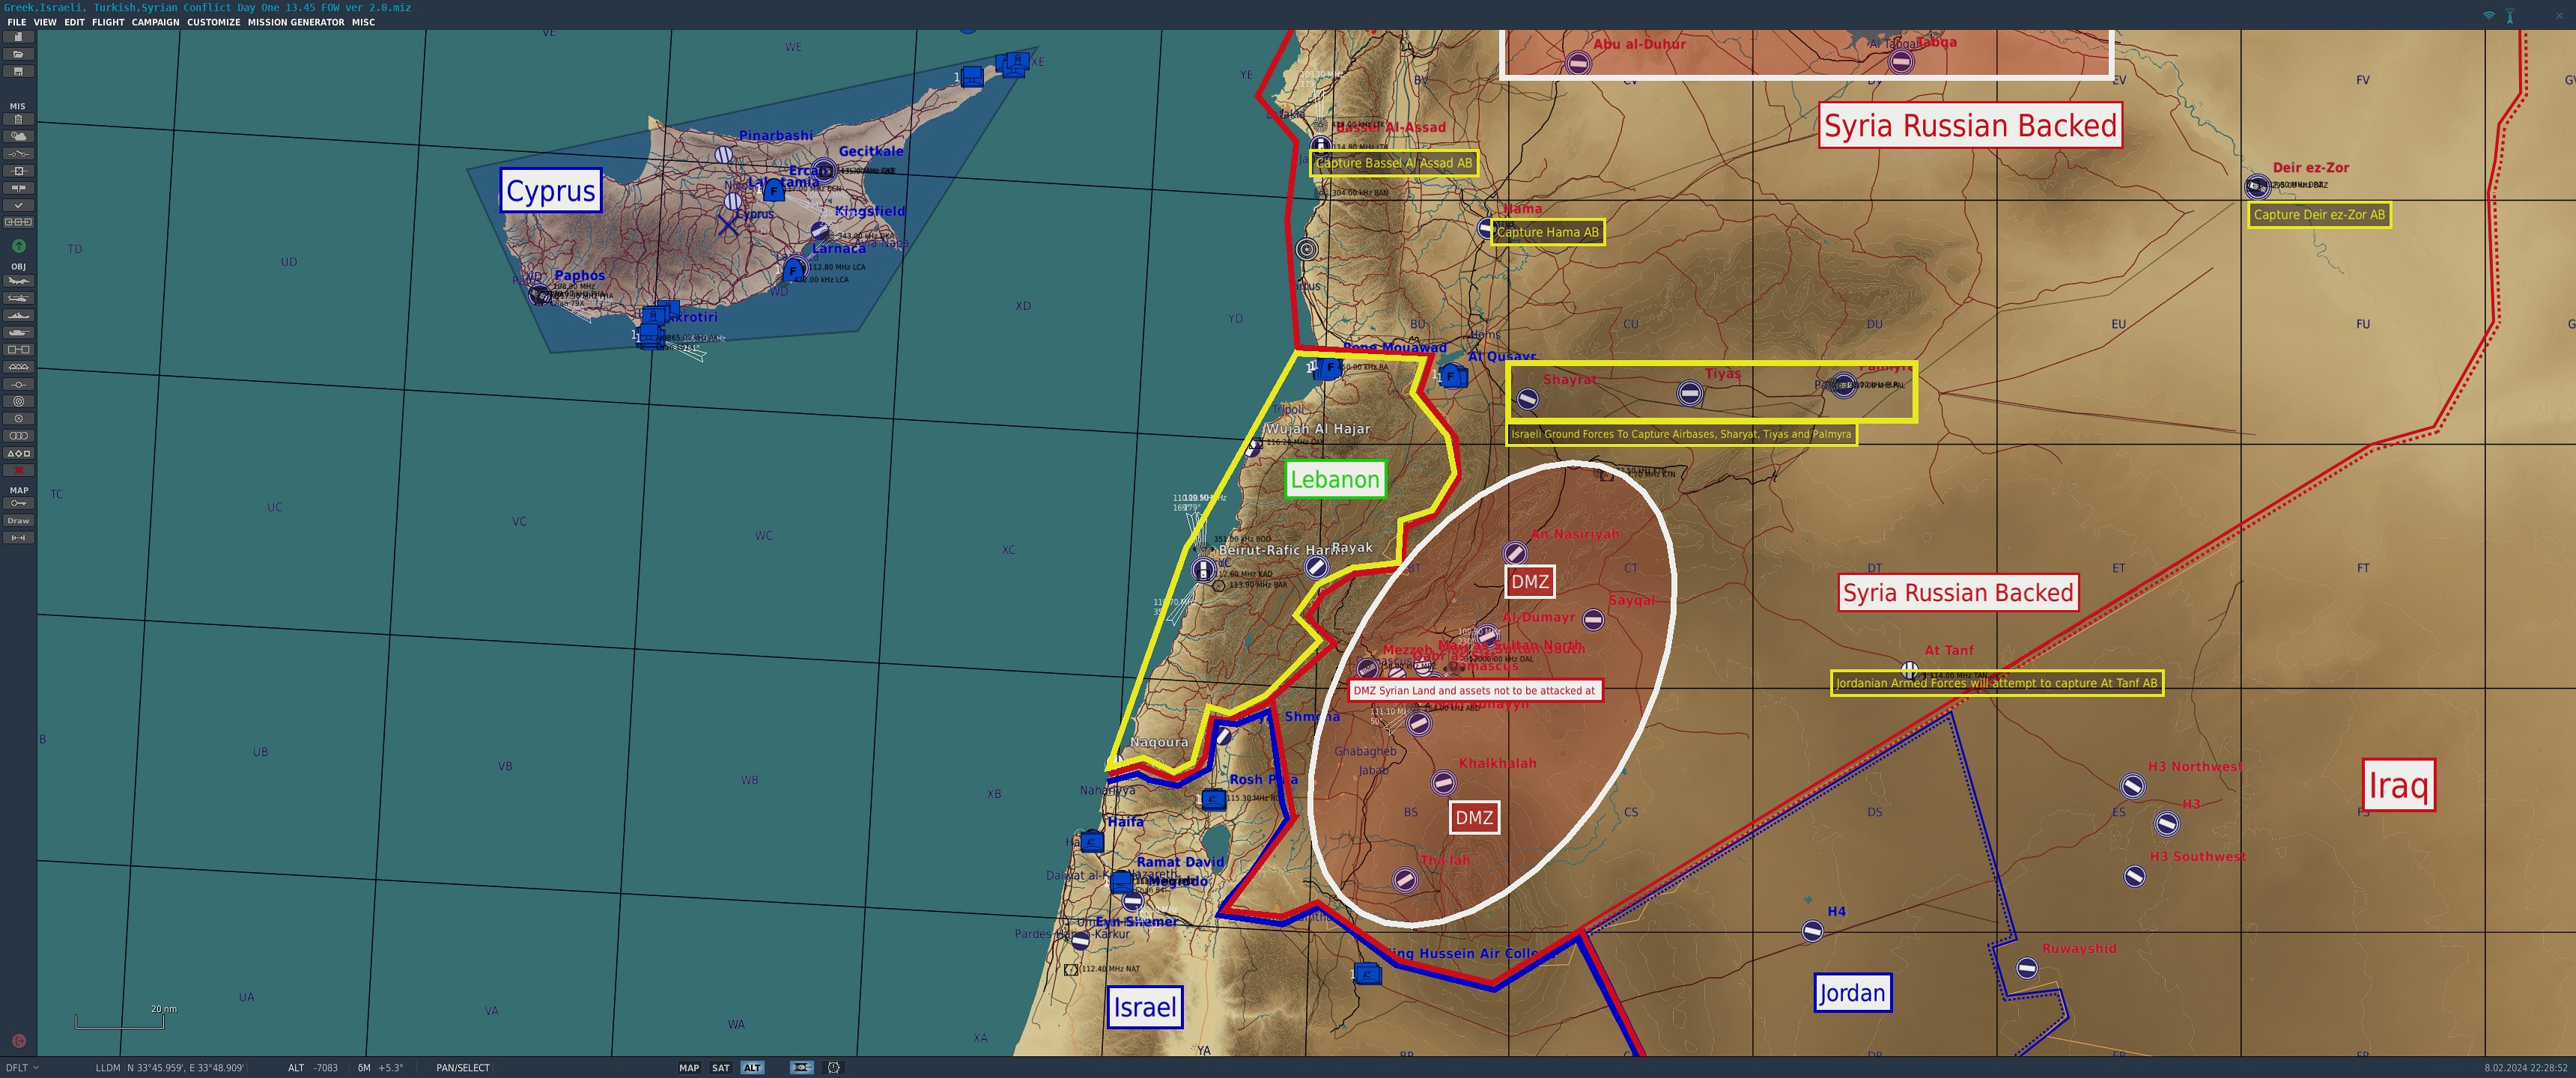 SP Viper Mission Fictional Syrian Map Conflict.